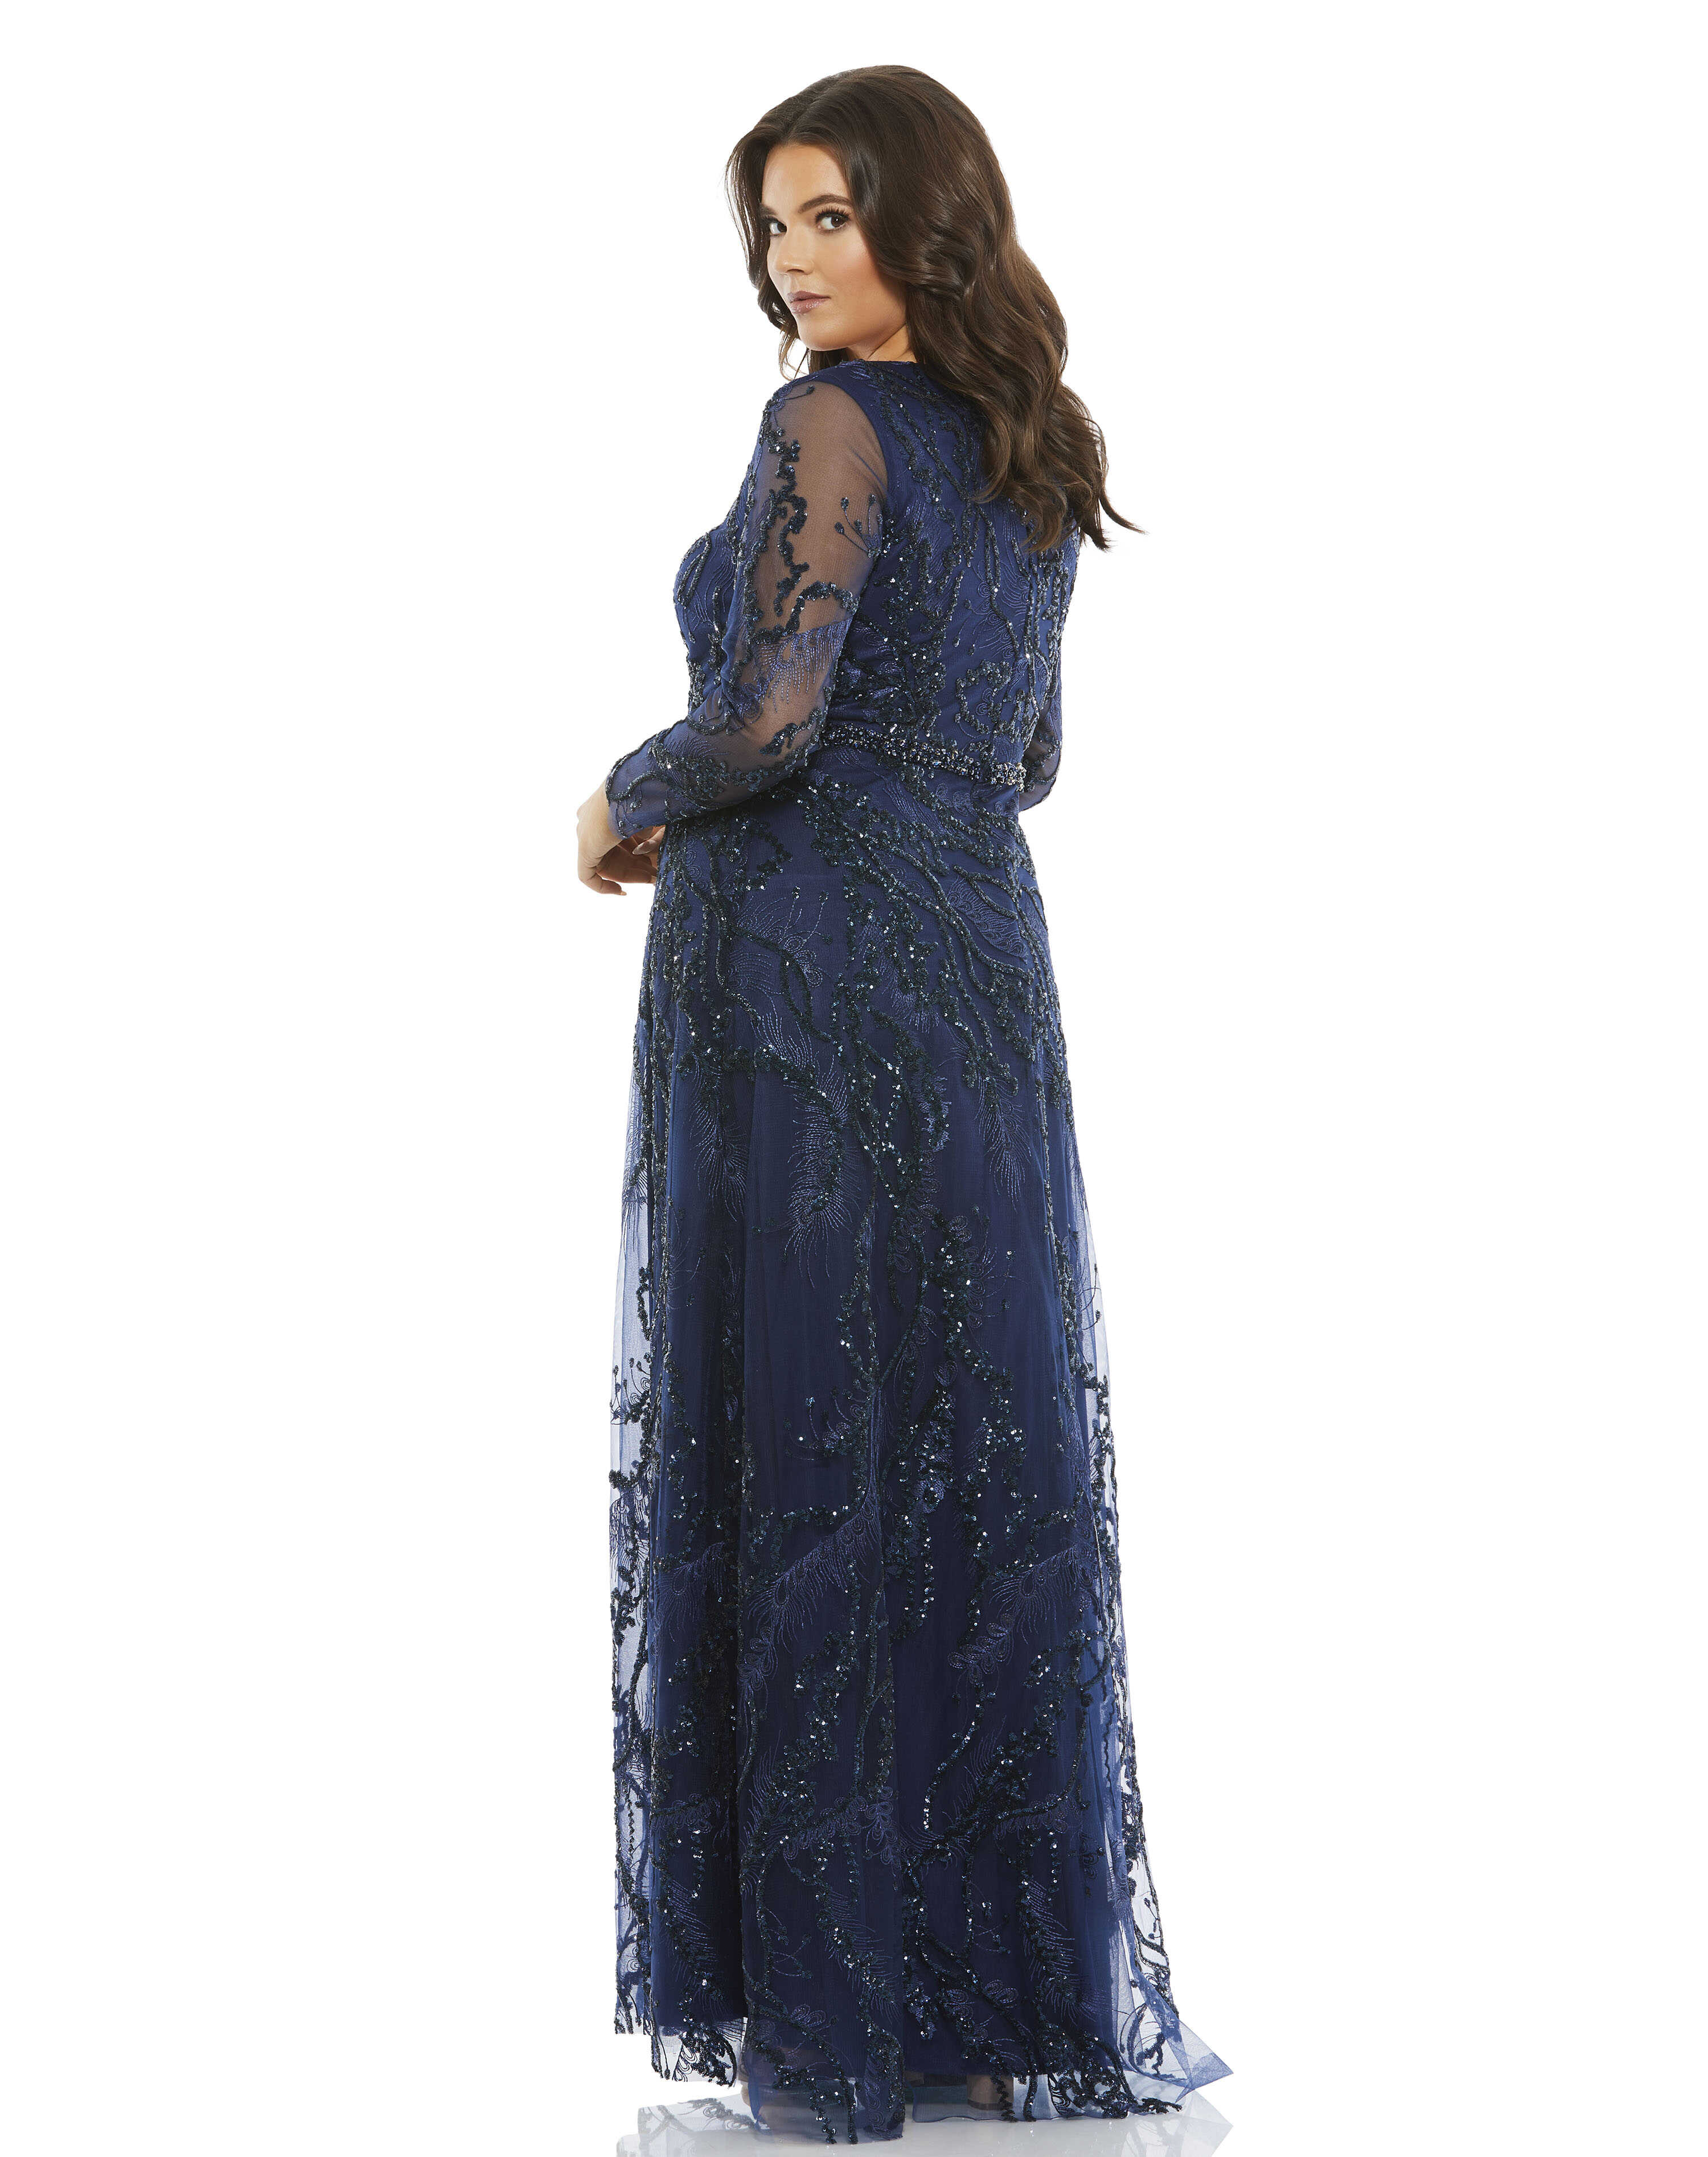 Embellished Illusion Long Sleeve V-Neck A-Line Gown (Plus)